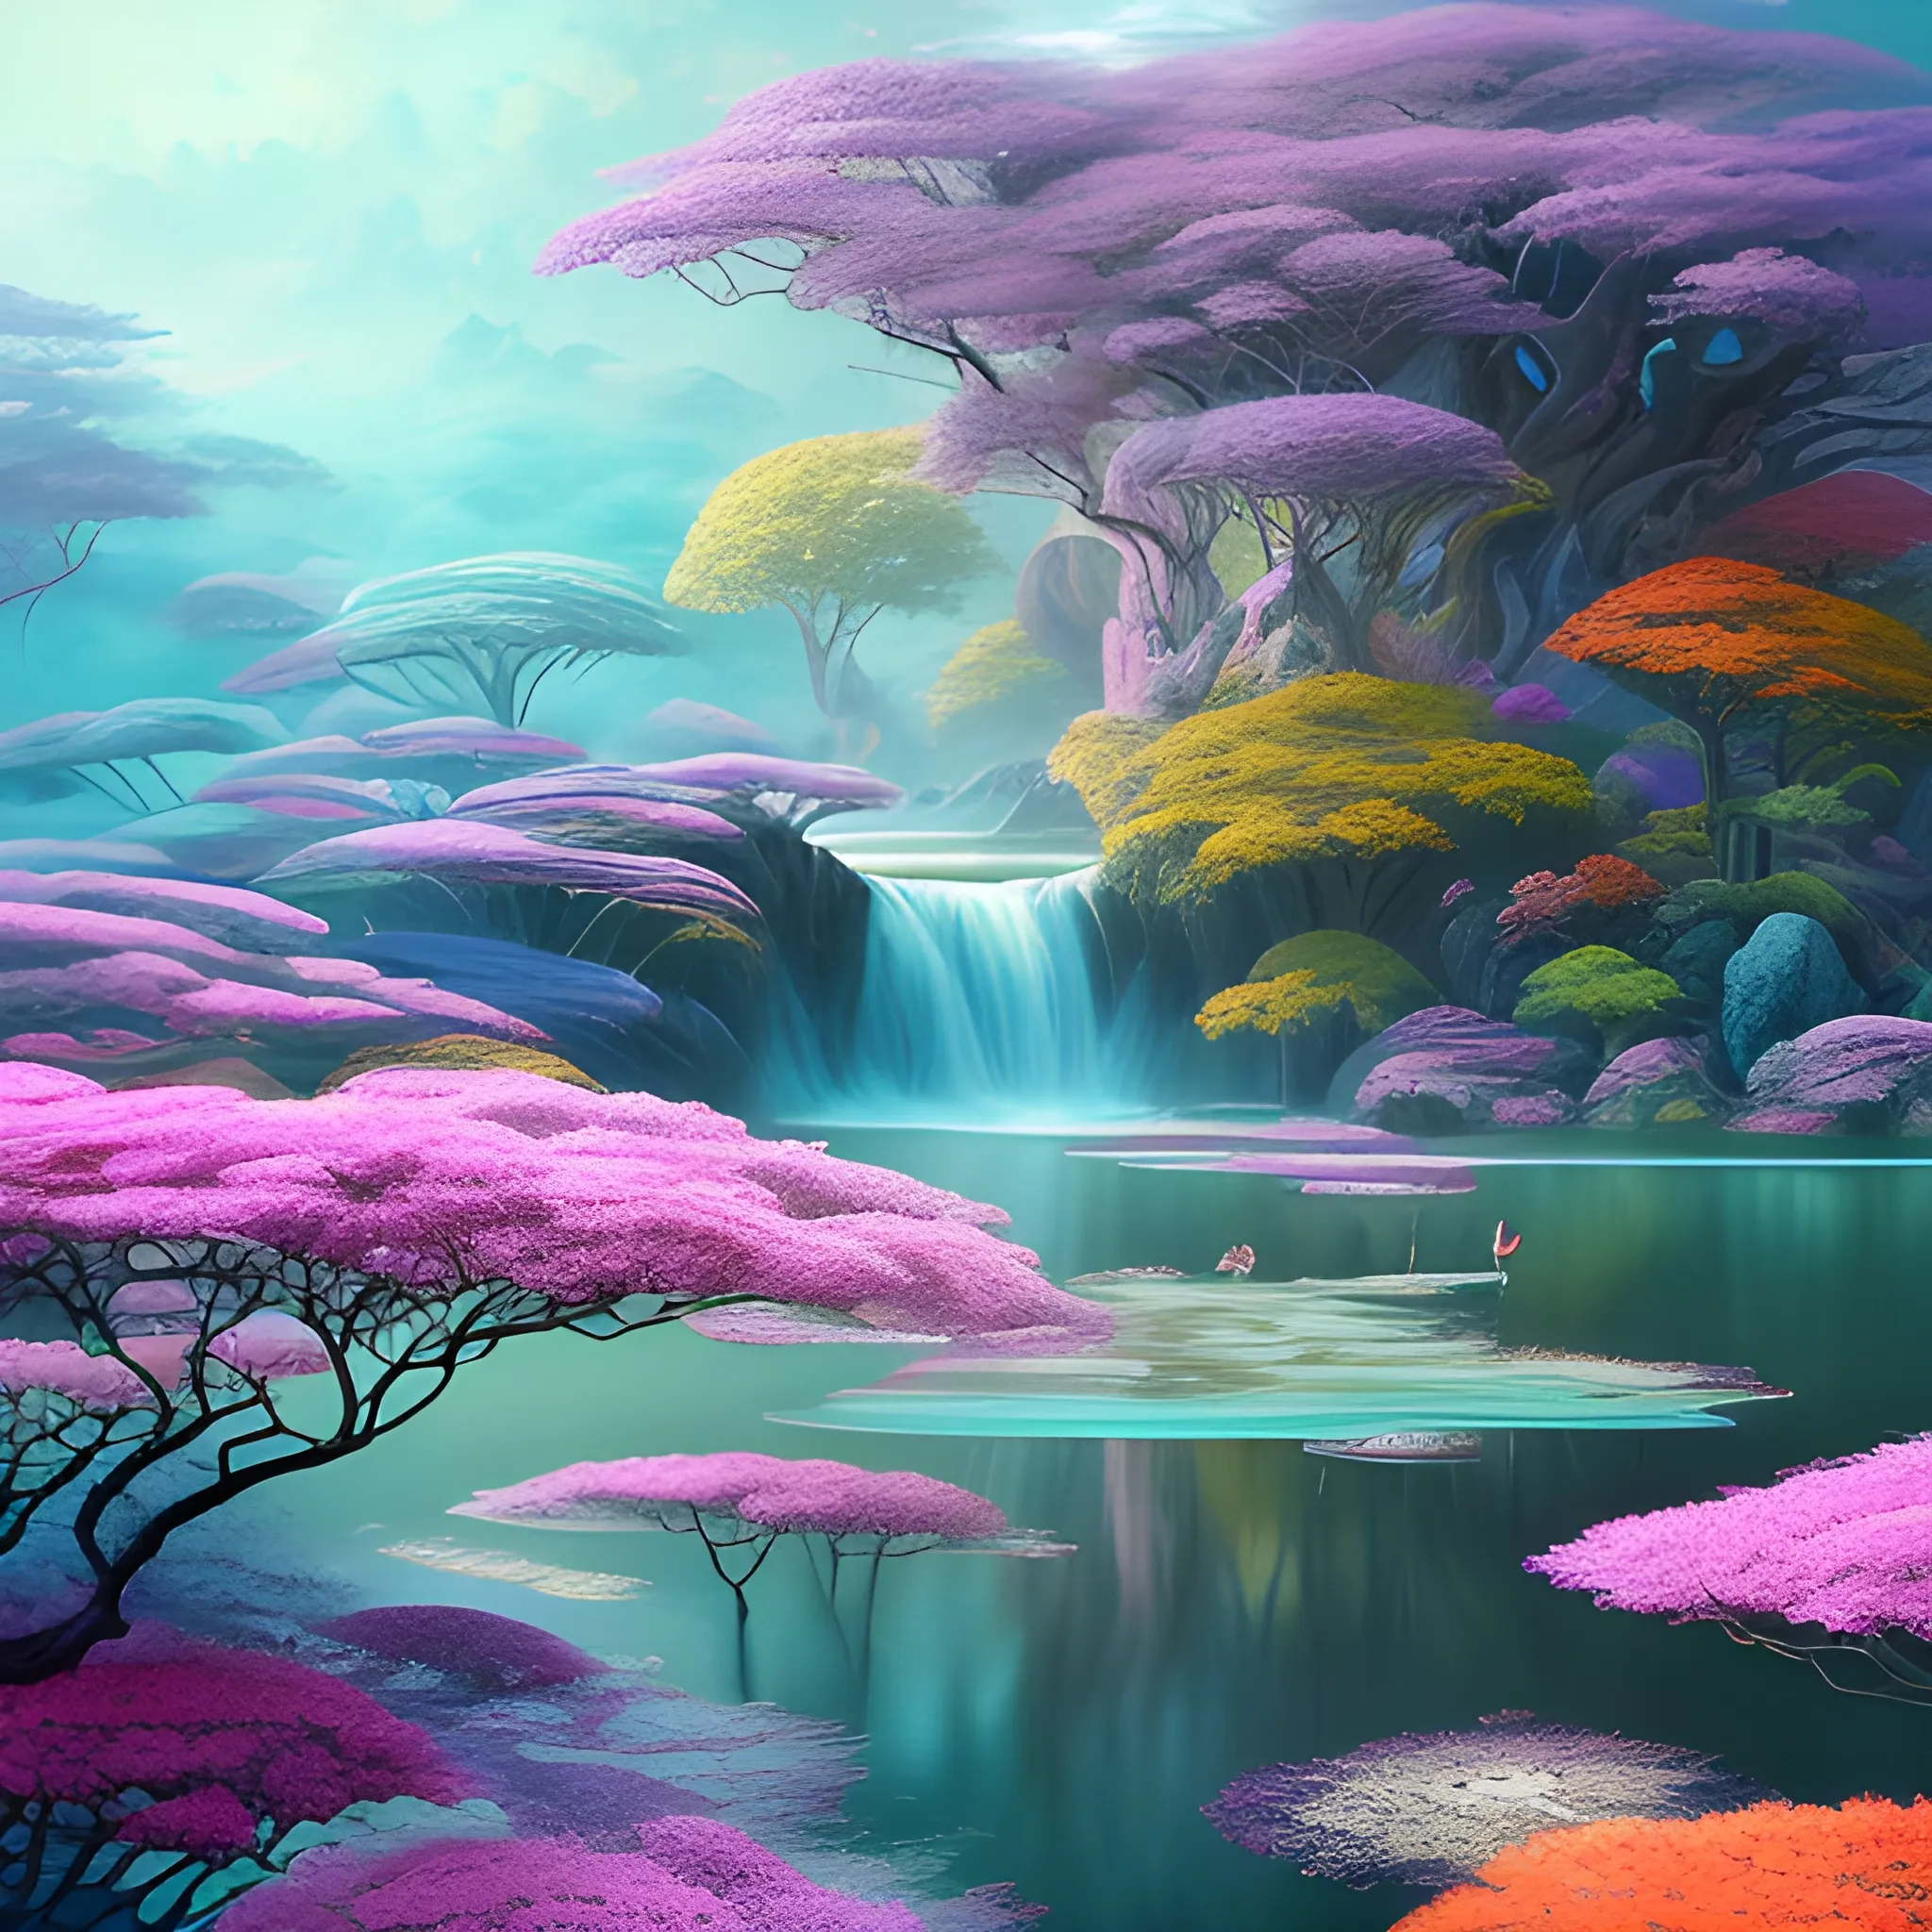 (by Ananta Mandal (and Andrew Biraj:0.5)), (in the style of nihonga), Style: Abstract, Medium: Digital illustration, Subject: An otherworldly landscape with floating islands, cascading waterfalls, and vibrant flora and fauna. Camera Angle: Overhead shot capturing the vastness and intricate details of the scene. The colors are saturated, and the lighting creates a warm and ethereal atmosphere. The painting is highly detailed, with every brushstroke capturing the complexity of the imaginary world., (high quality), (detailed), (masterpiece), (best quality), (highres), (extremely detailed), (8k)